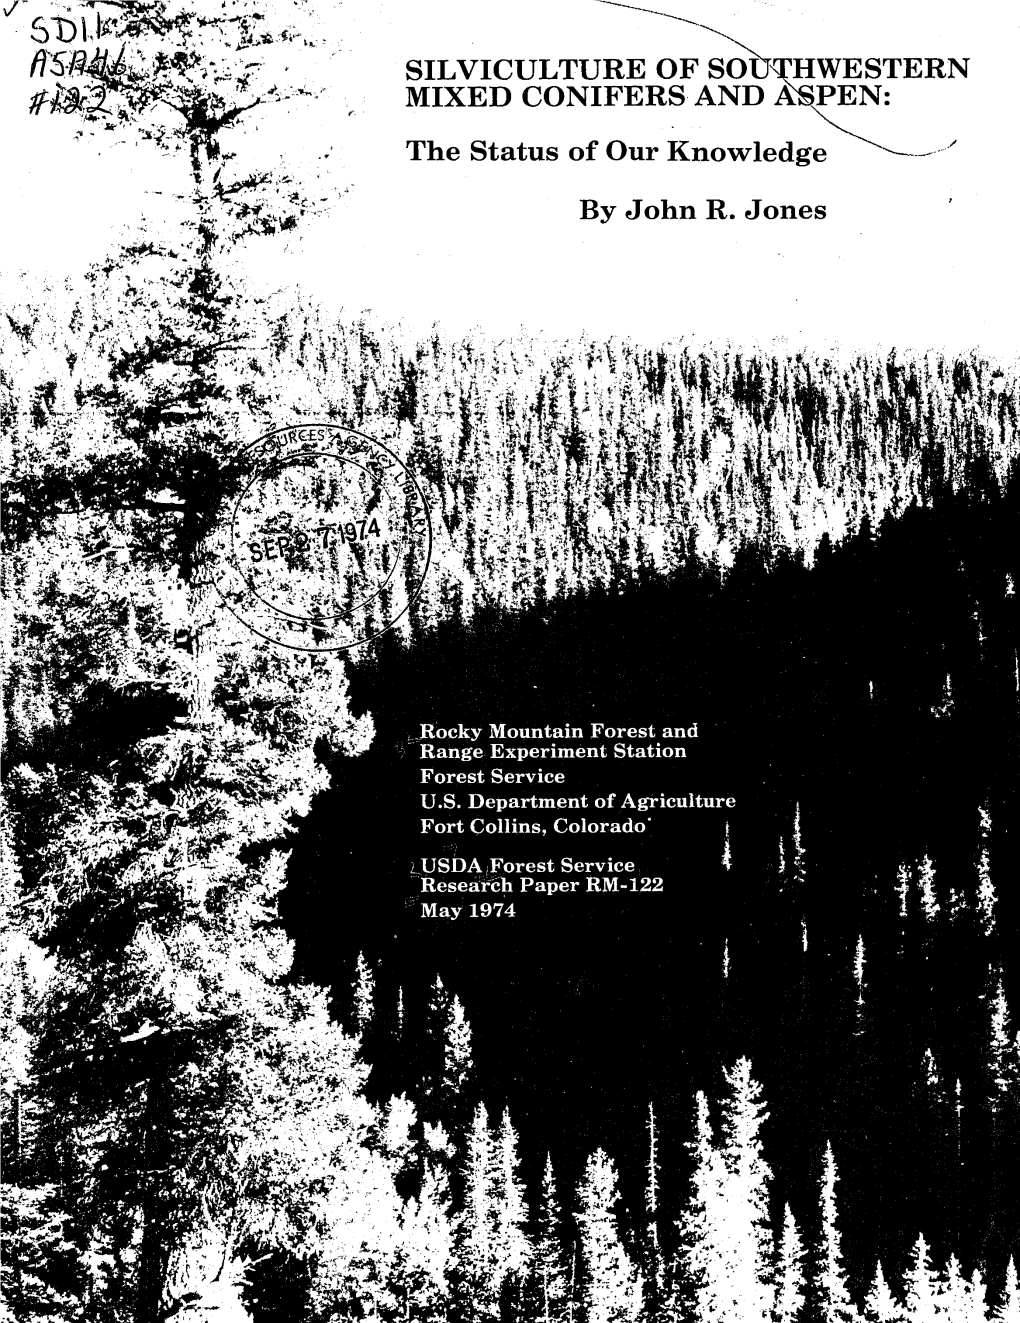 SILVICULTURE of MIXED CONIFERS the Status of Our